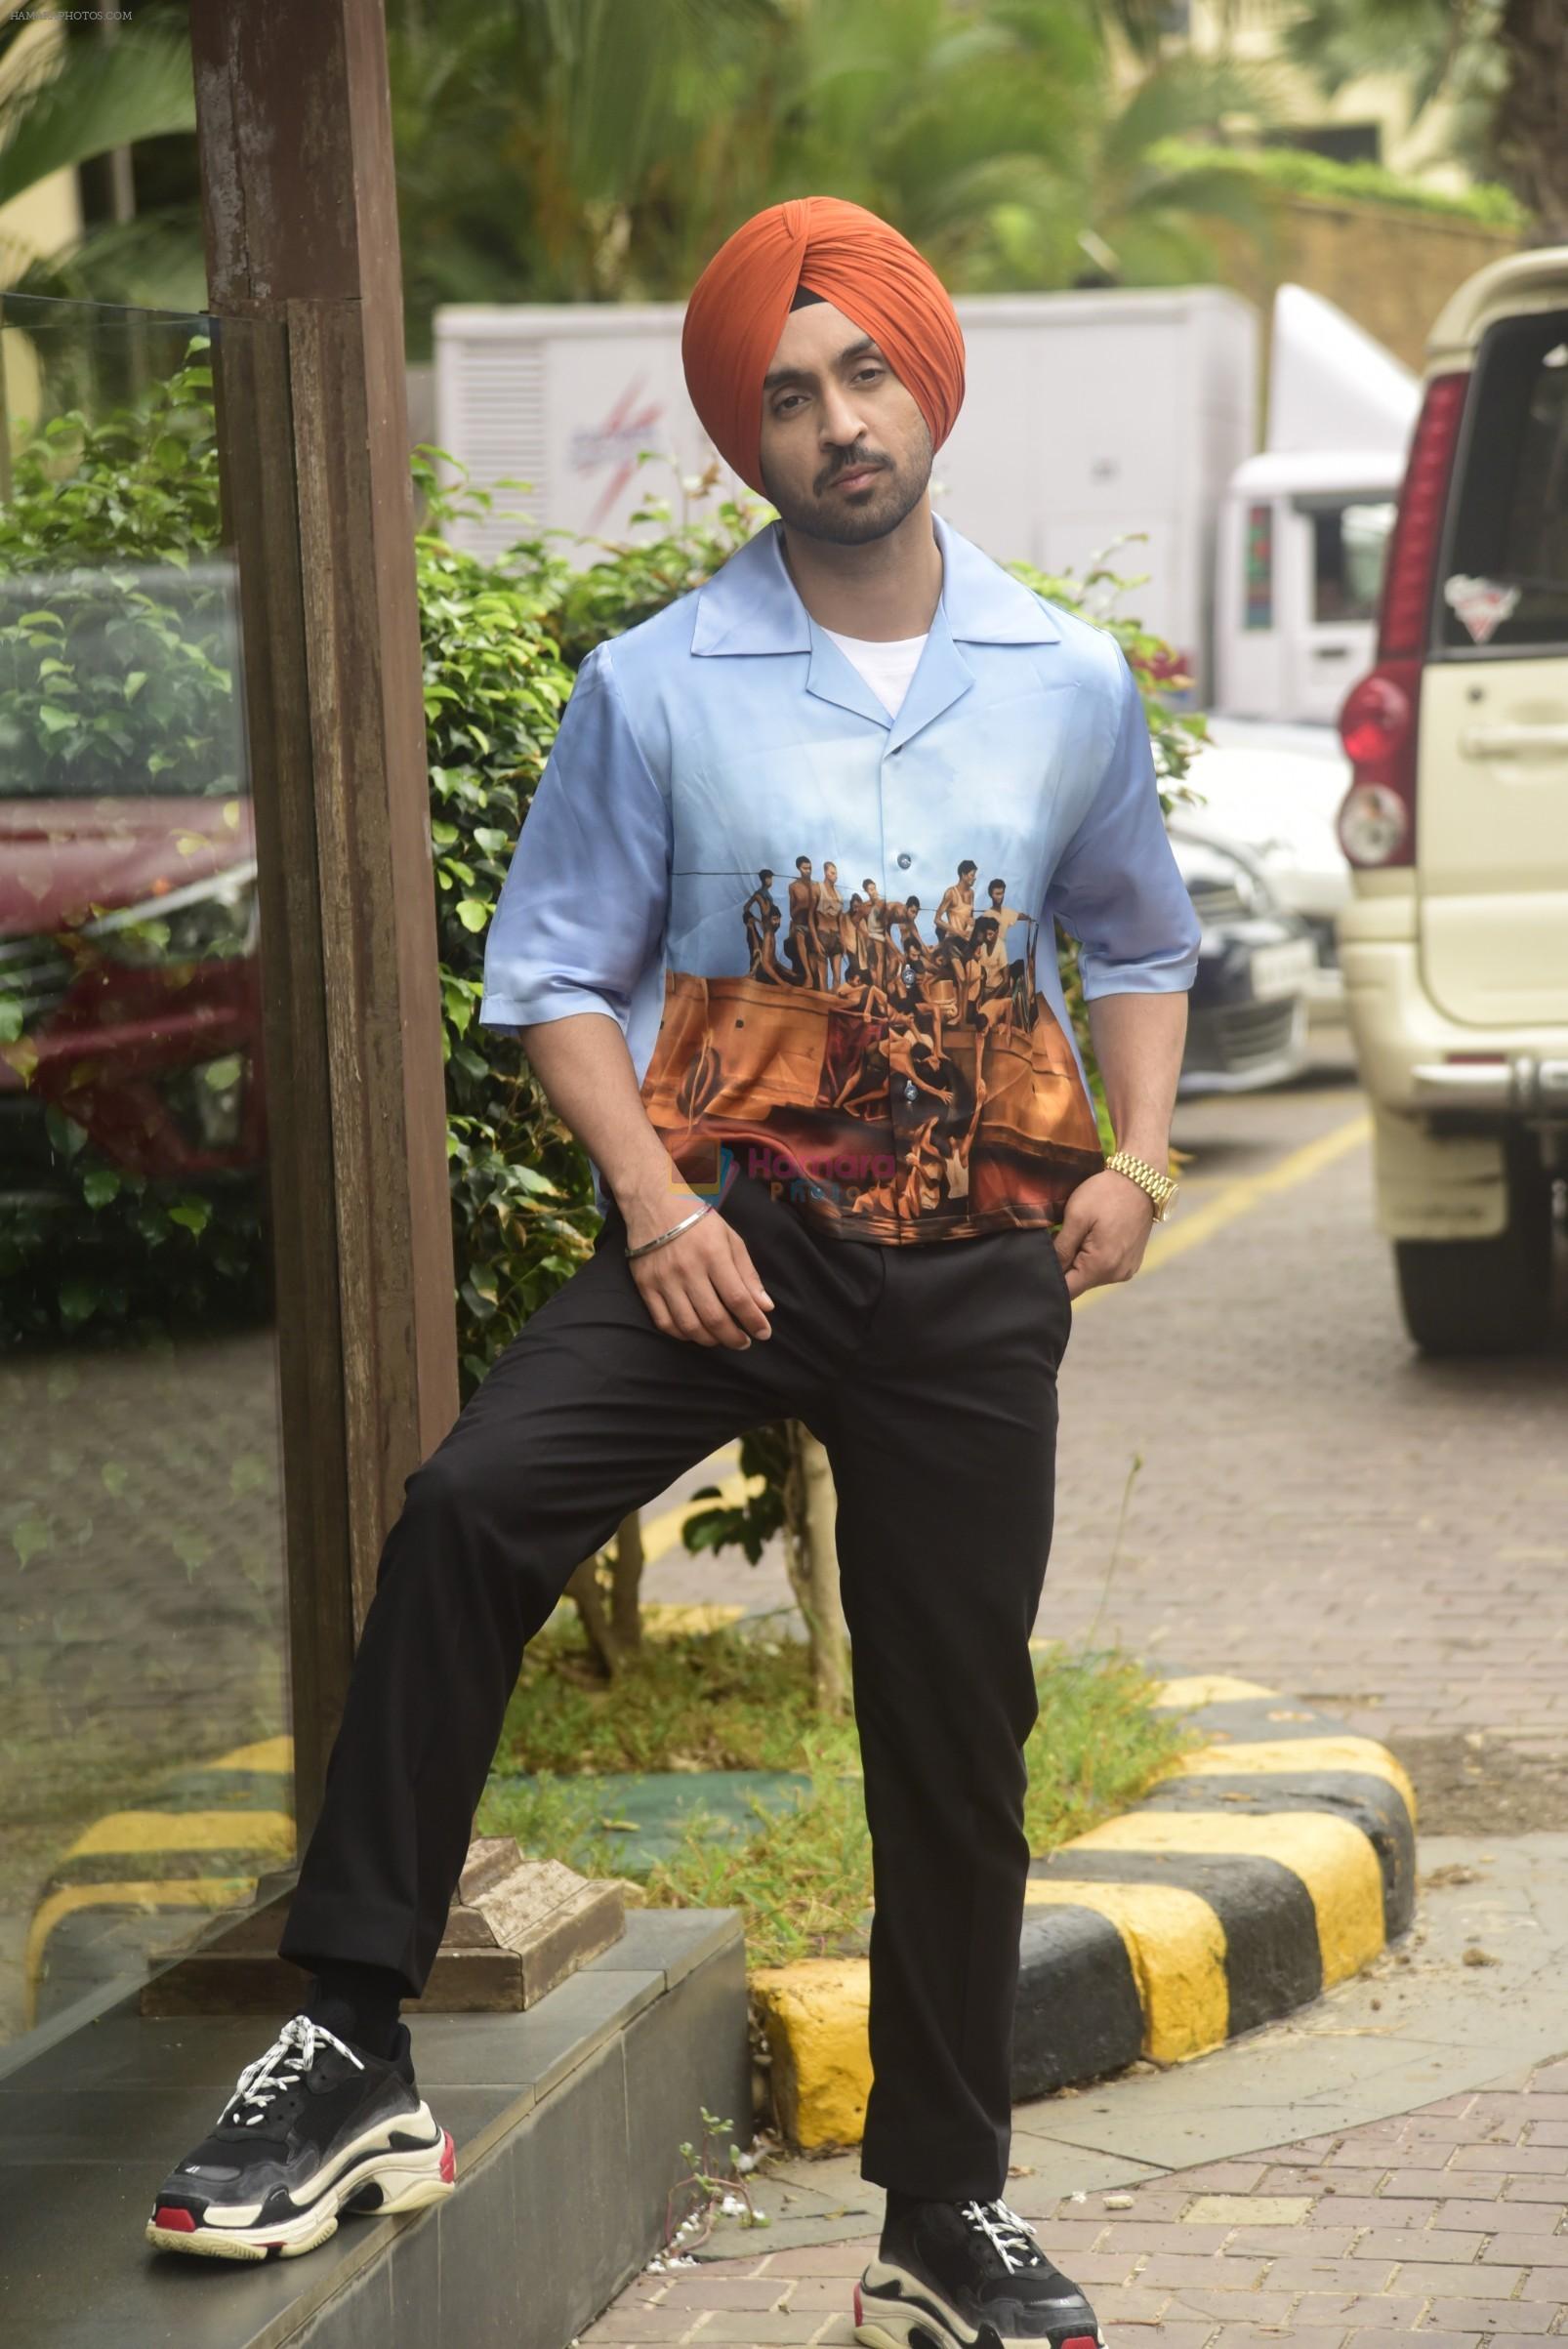 Diljit Dosanjh promotes his film Soorma at jw marriott in juhu on 22nd June 2018